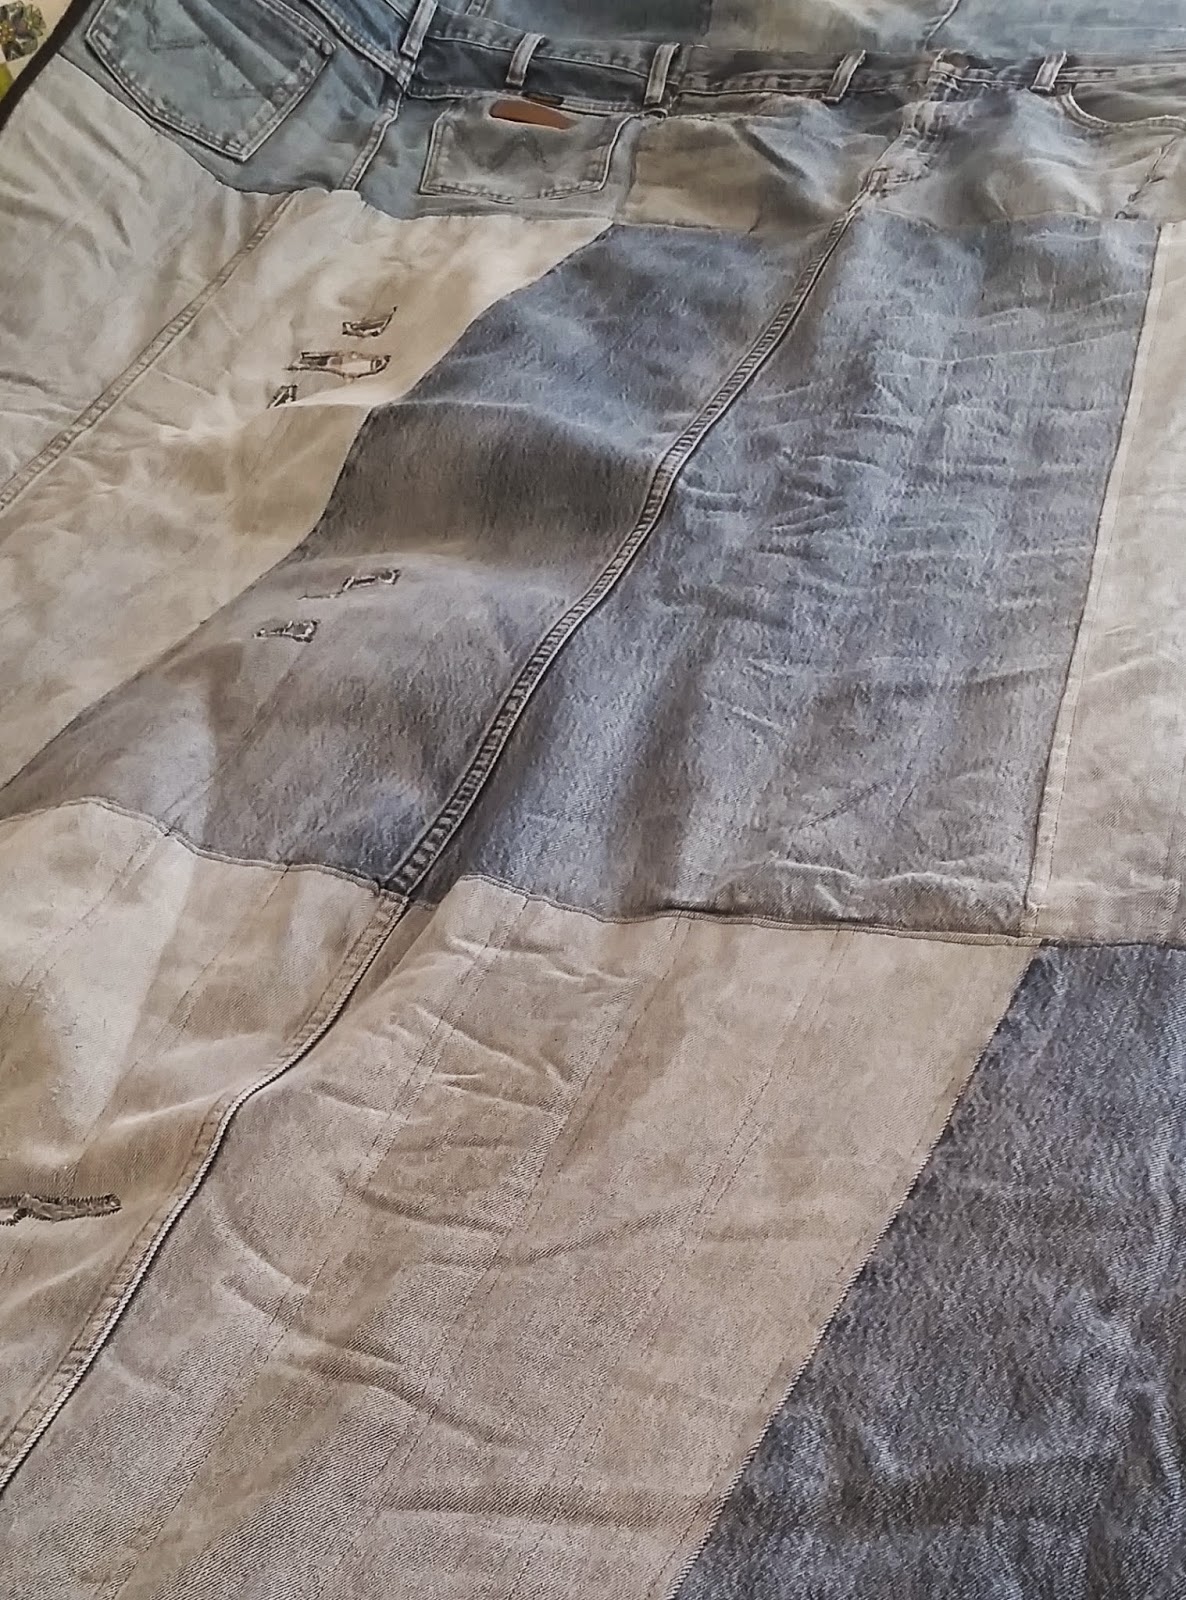 Vicki Sews: My First Quilt - An Upcycled Denim Quilt by Vicki Isaacs ...